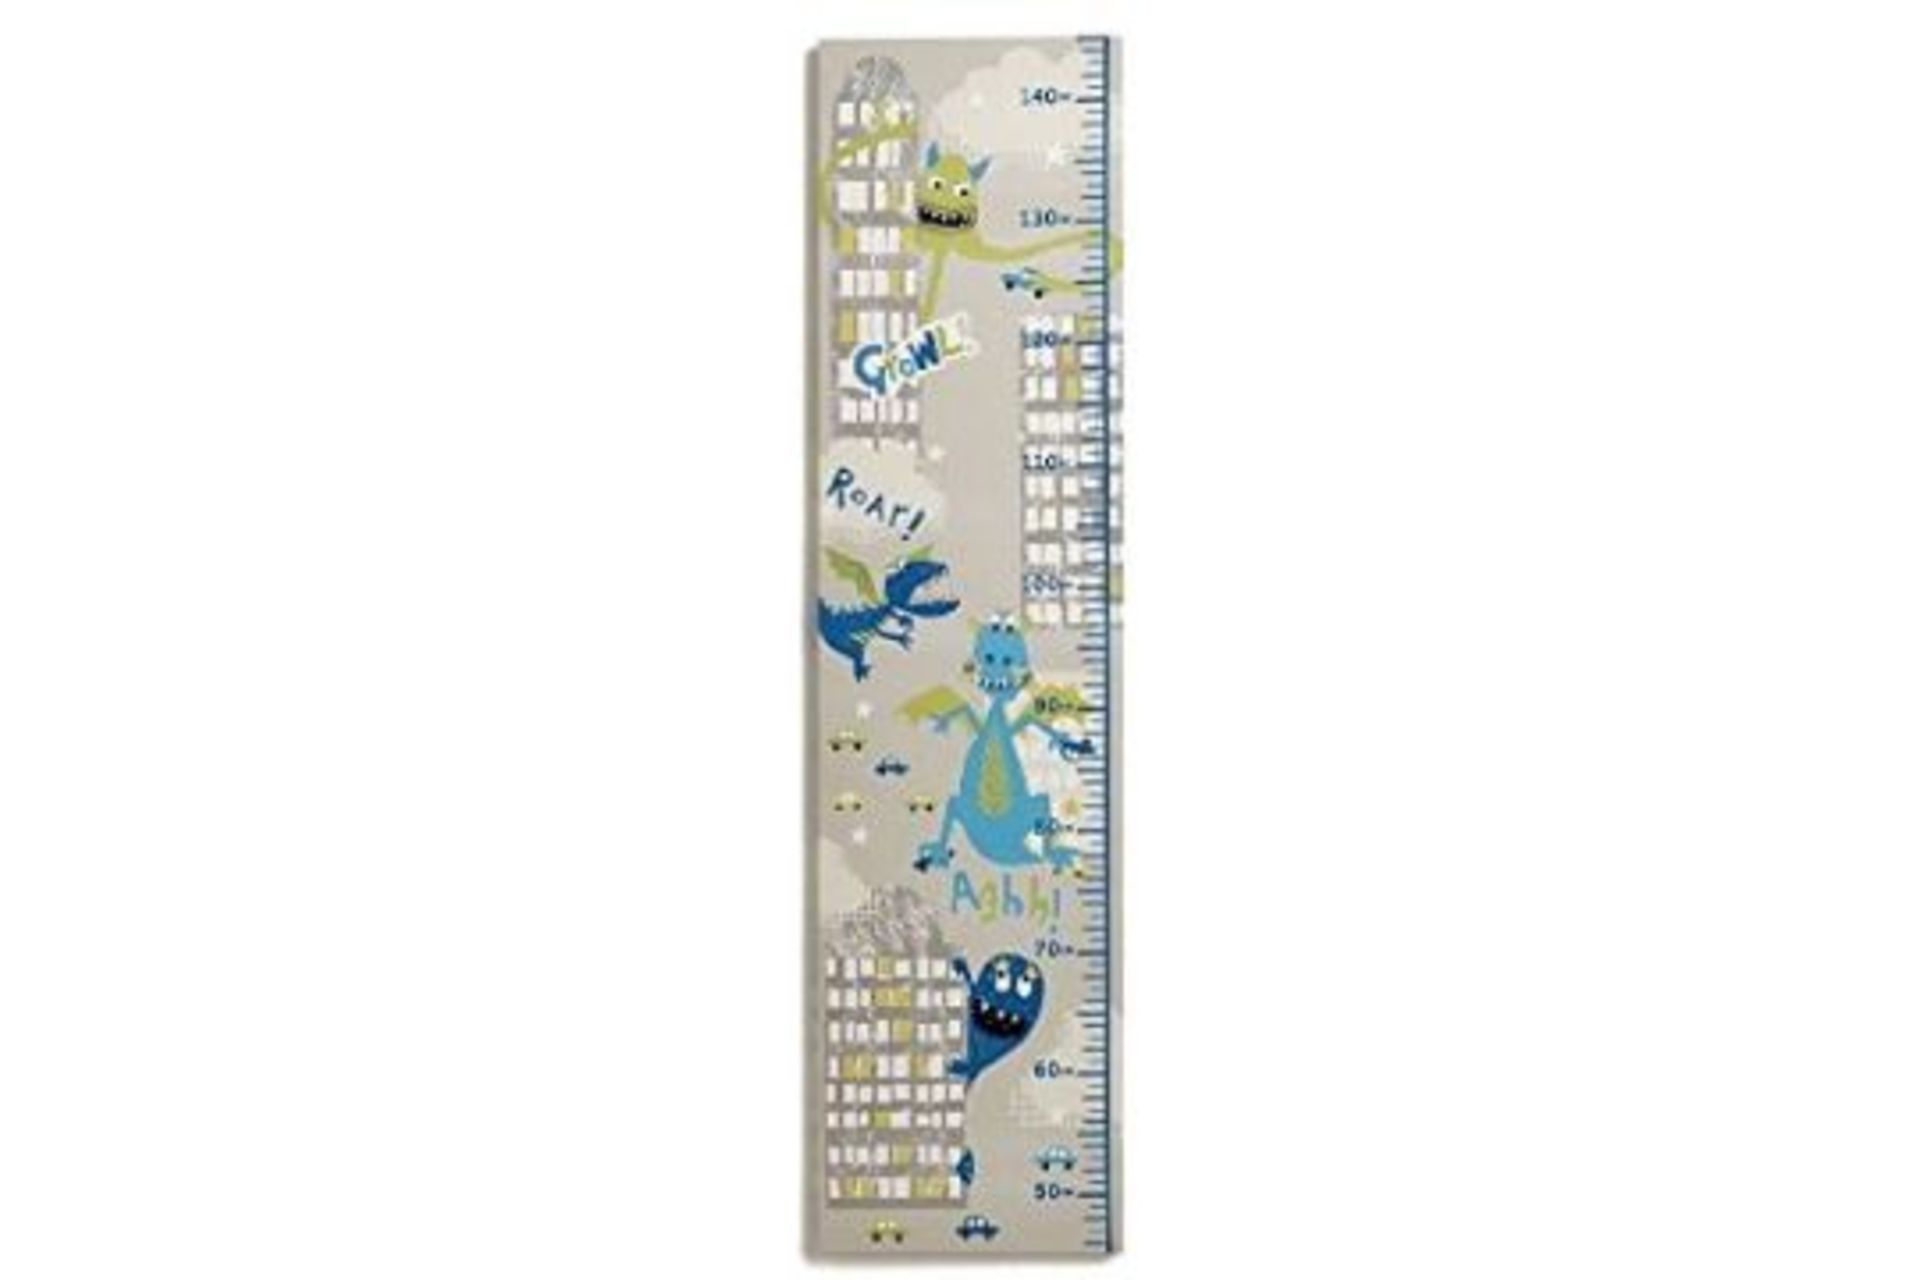 £15.39 each 6 x Arthouse Monster Madness Height Chart, Multi-Colour, 25 x 100 x 1.8 cm